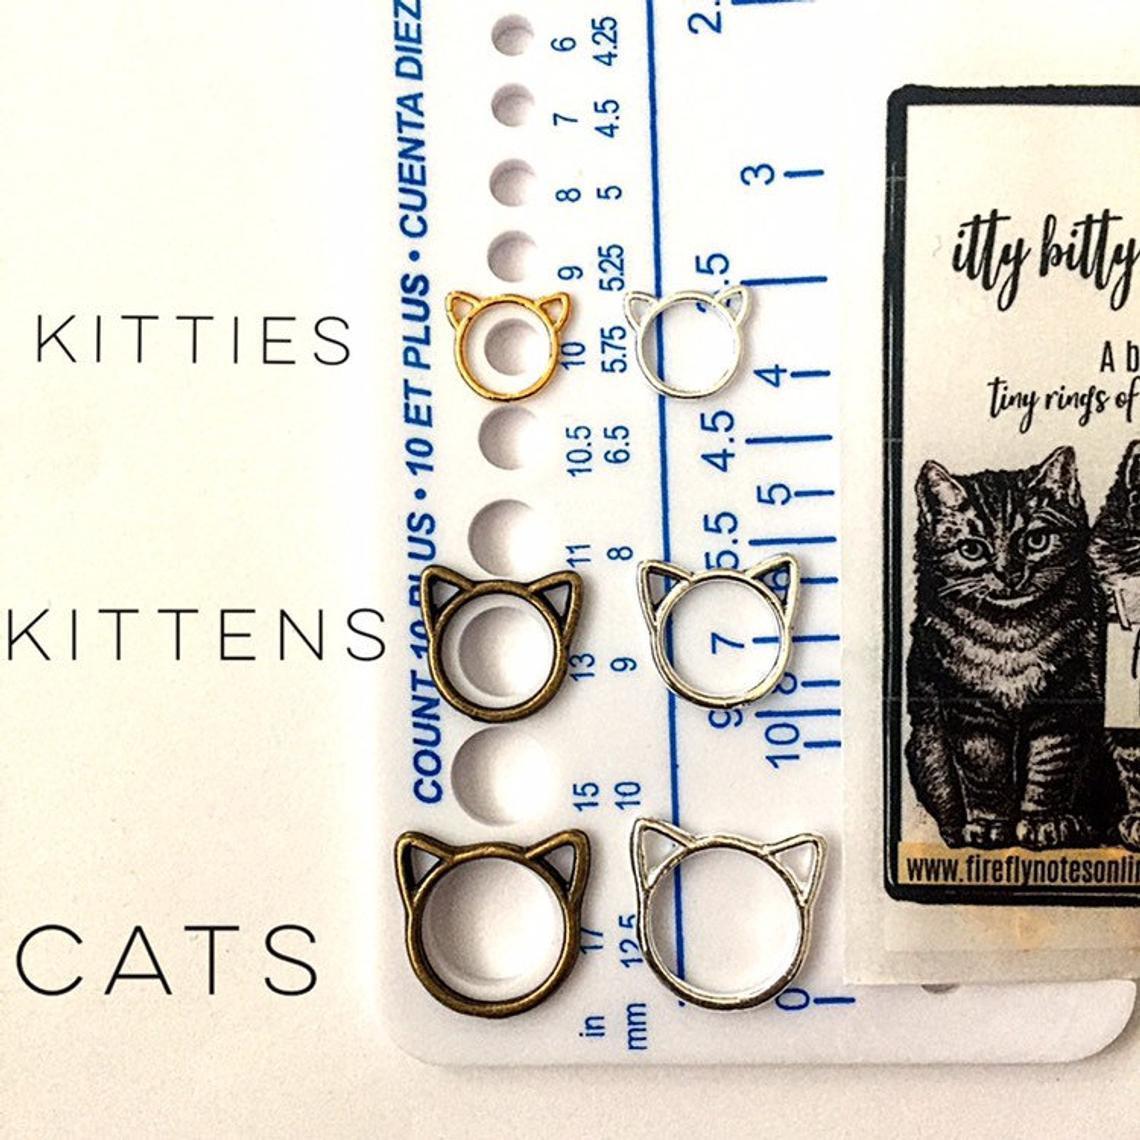 X-Large Metal Ring Stitch Markers